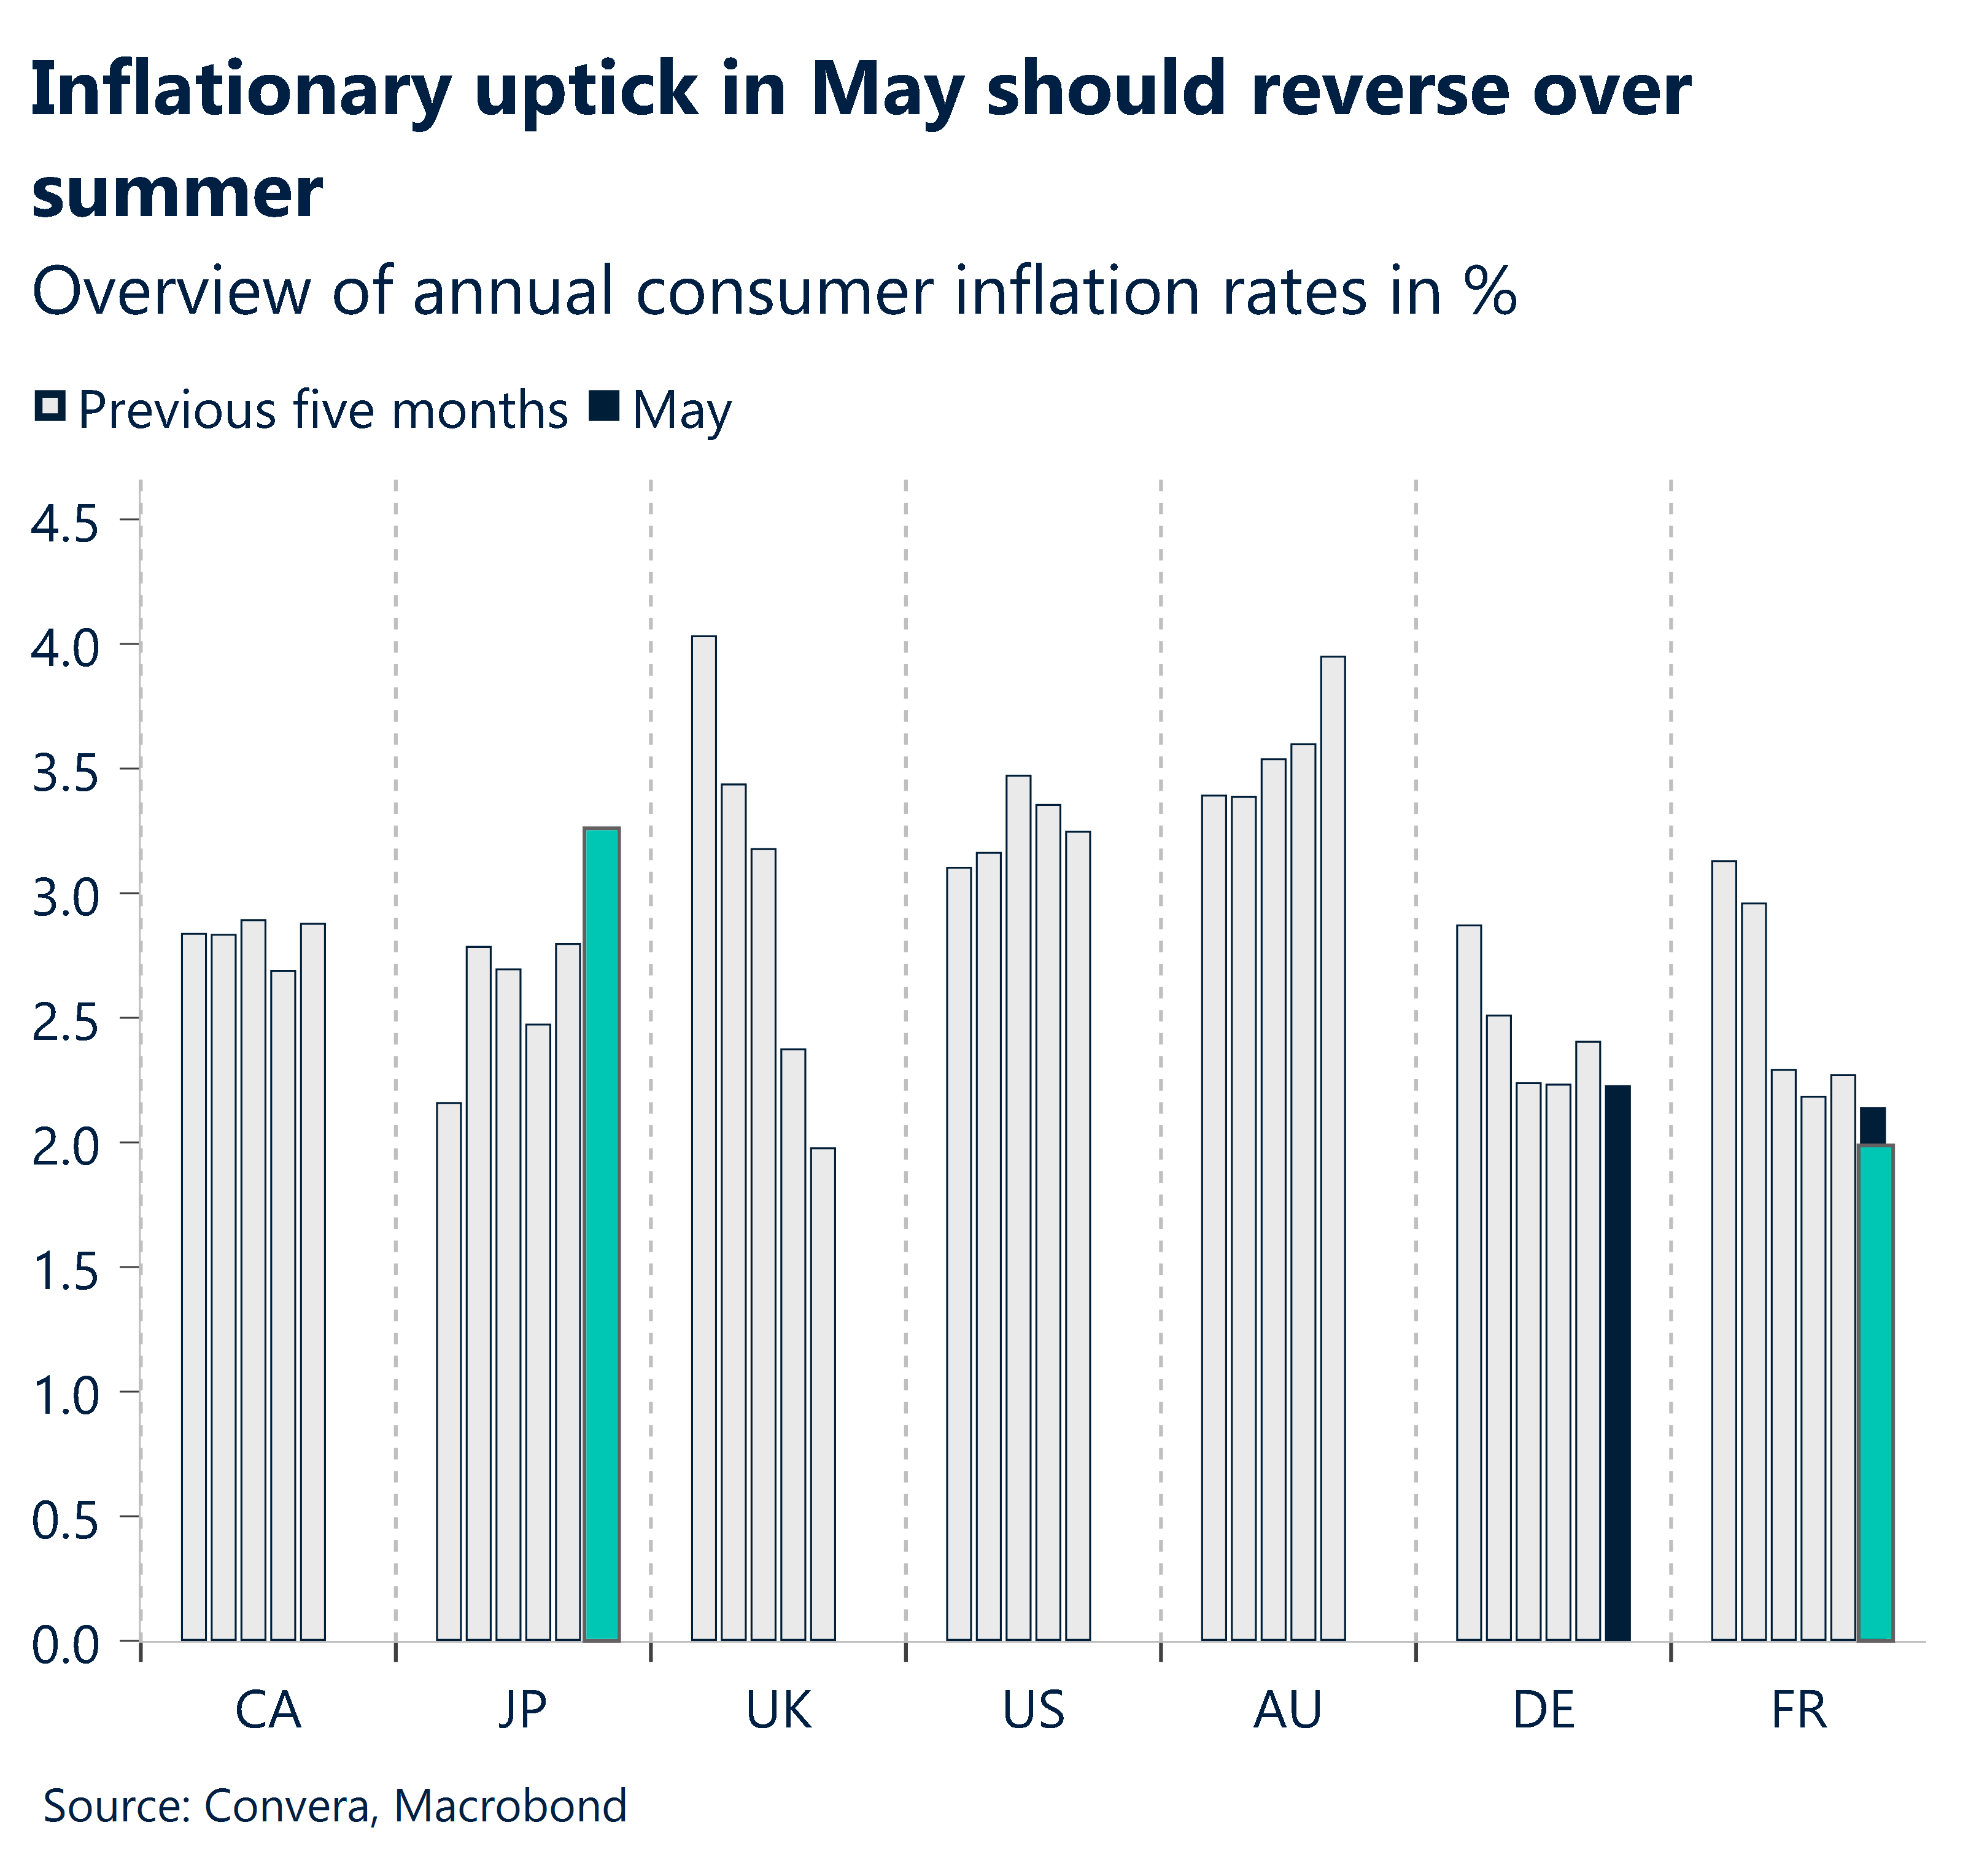 Chart showing overview of annual consumer inflation rates in multiple countries